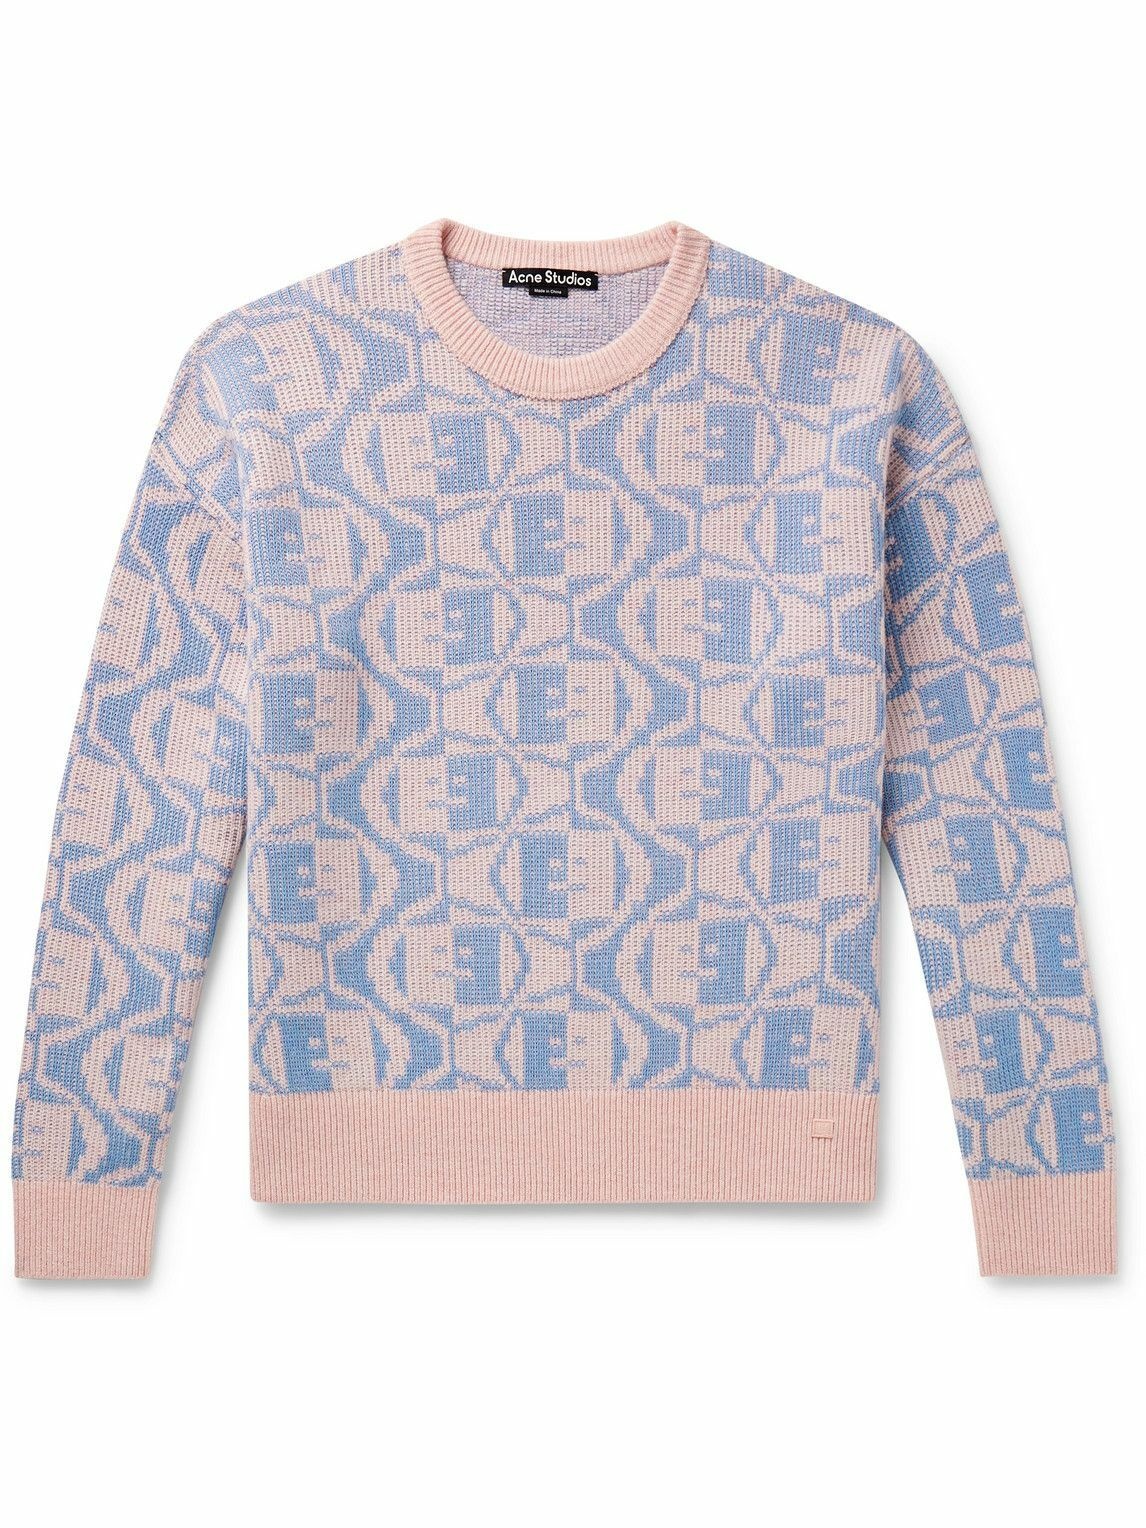 Acne Studios - Katch Jacquard-Knit Wool and Cotton-Blend Sweater - Pink ...